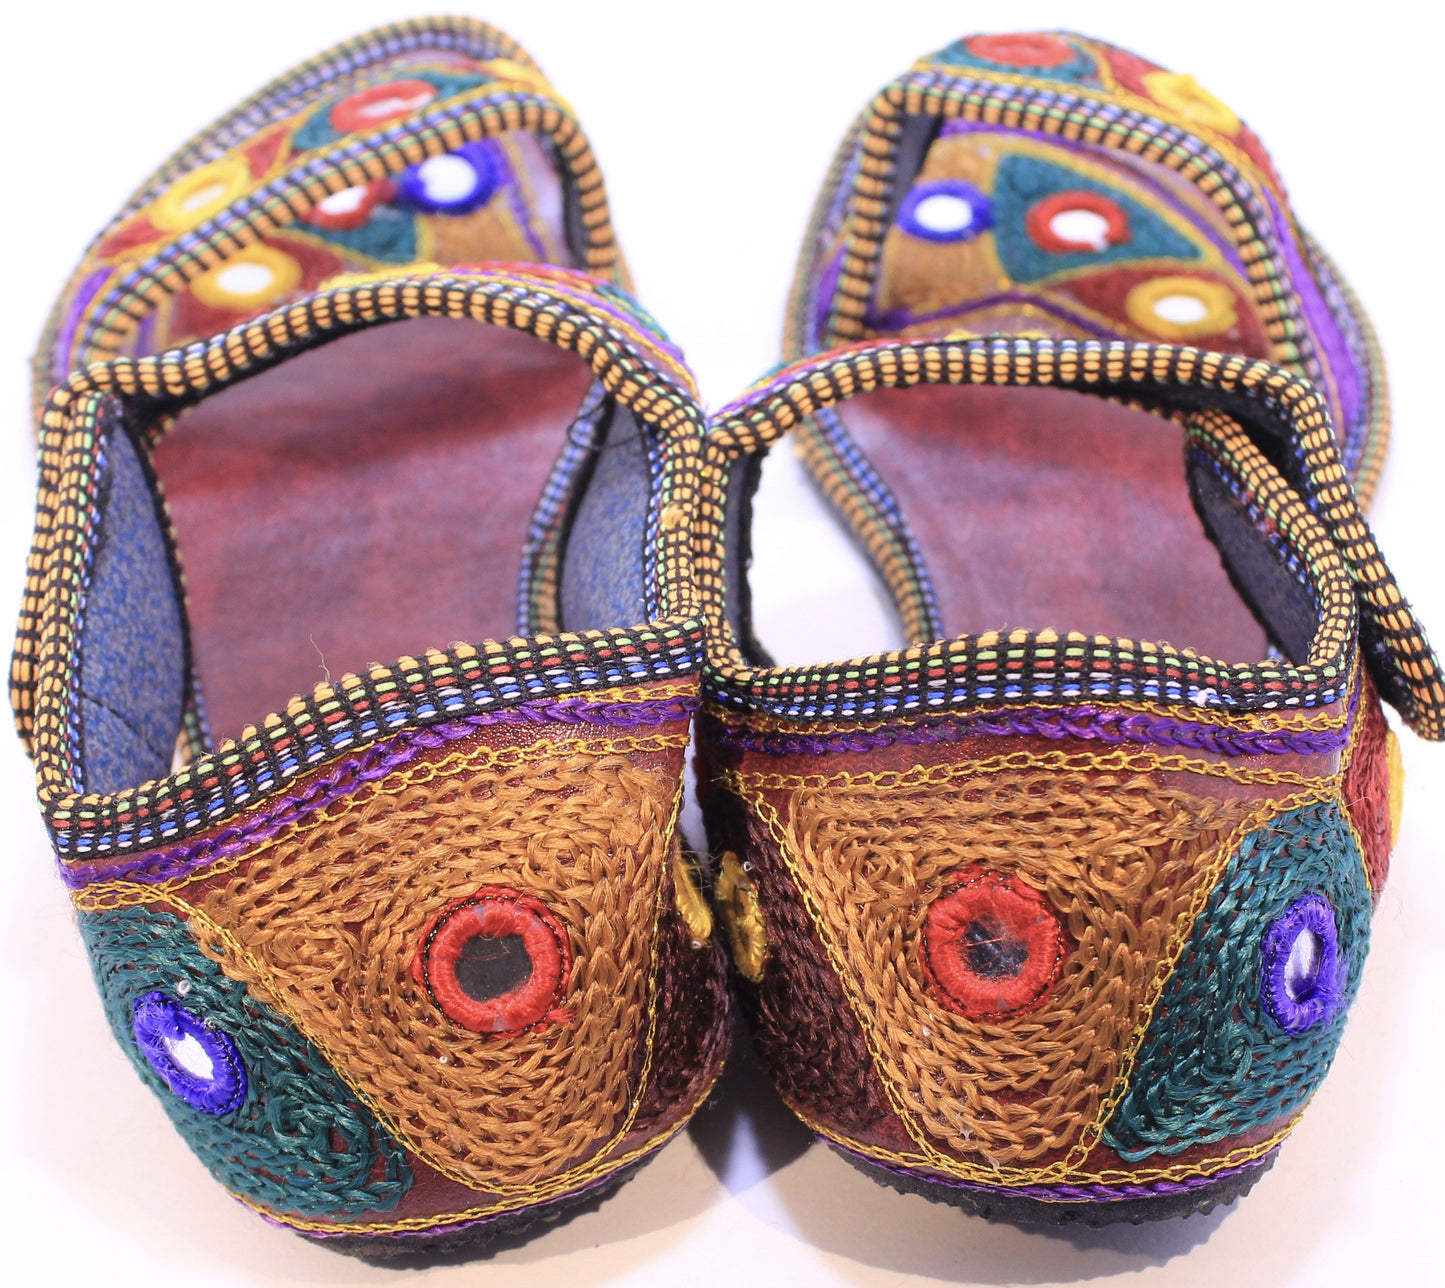 Hand Embroidered Sandals from India.